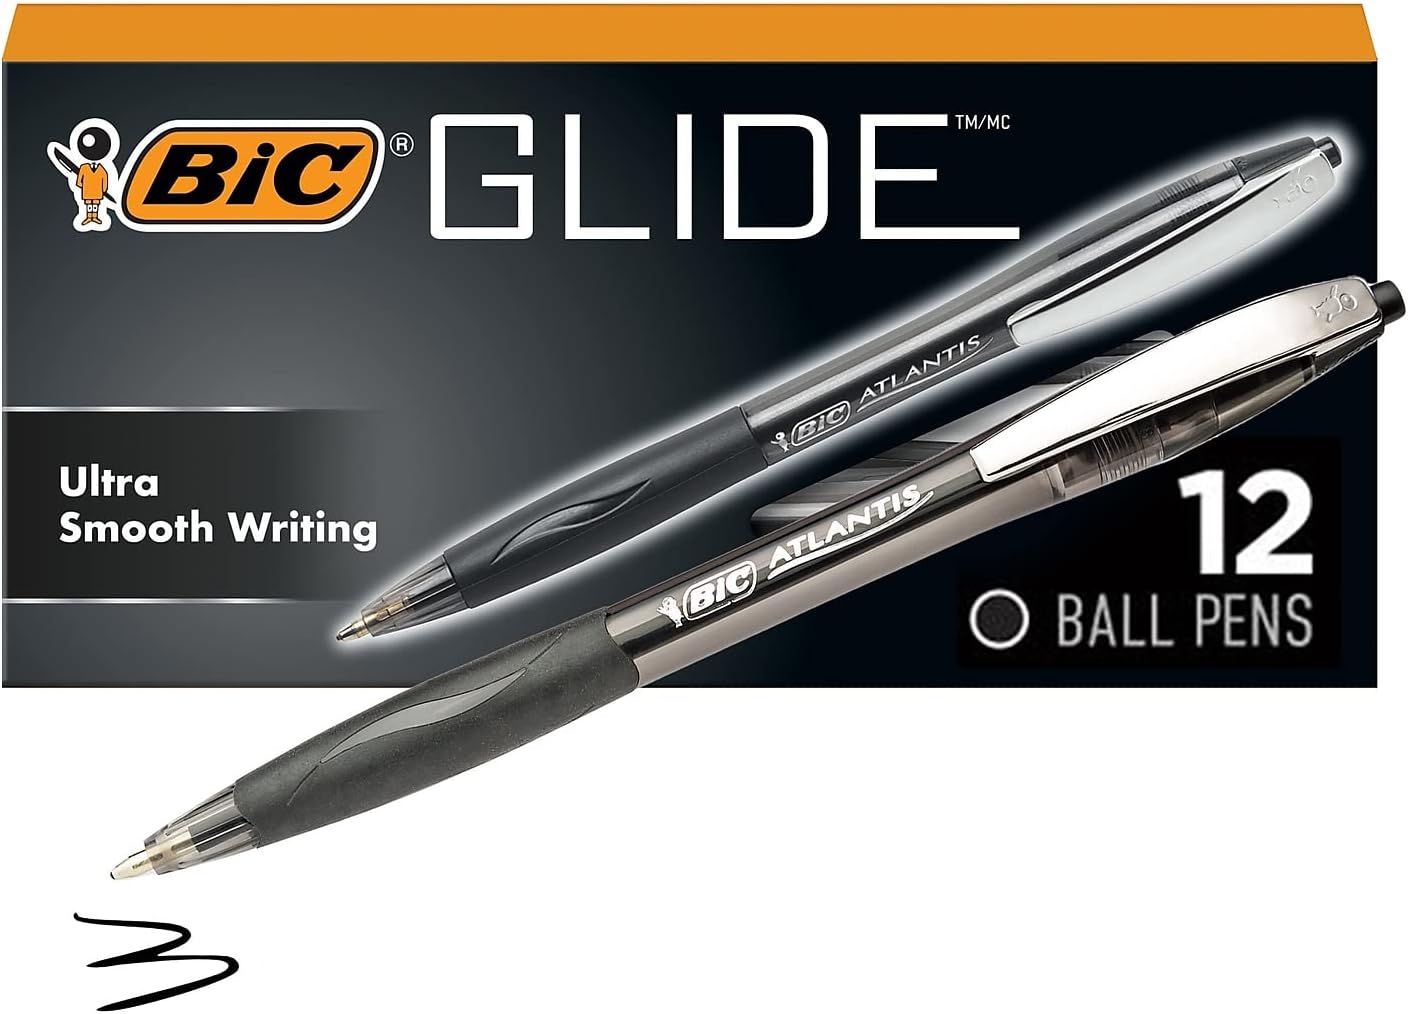 BIC Glide Retractable Ball Pens, Medium Point (1.0 mm), Black, Comfortable Rubber Grip For Writing, 12-Count Pack (VCG11-BLK)